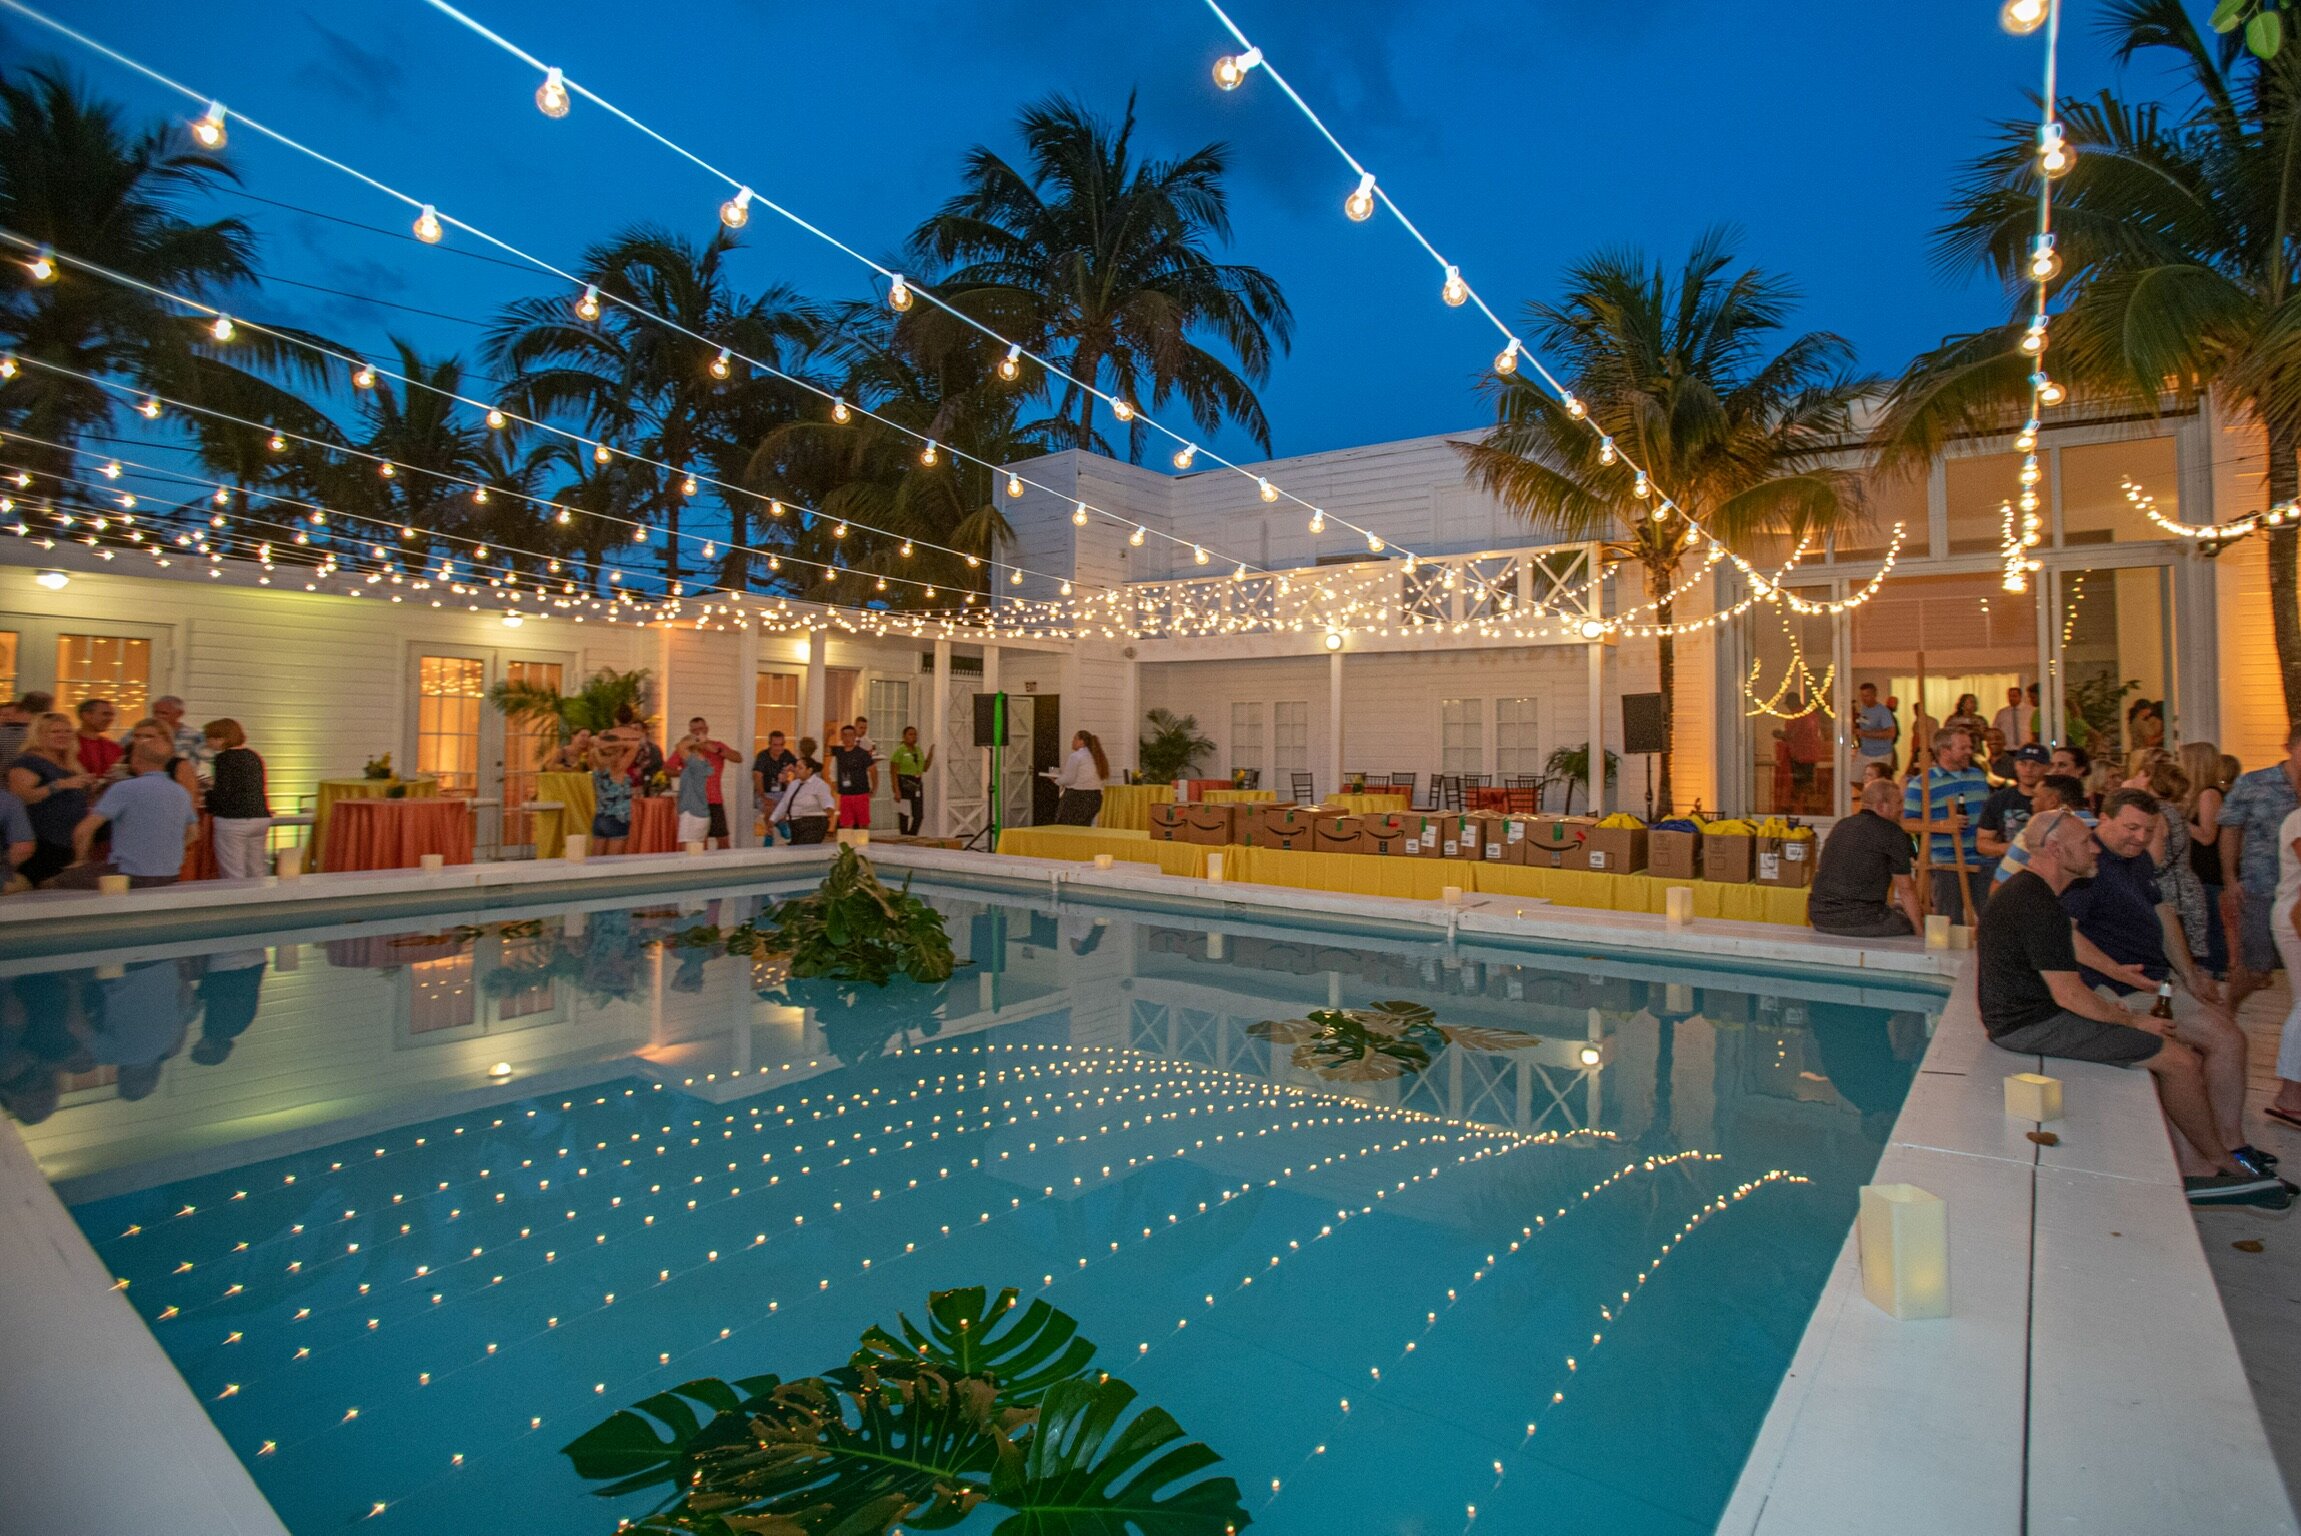  Outdoor Corporate Event at The Oasis in the Magic City Innovation District in South Florida 